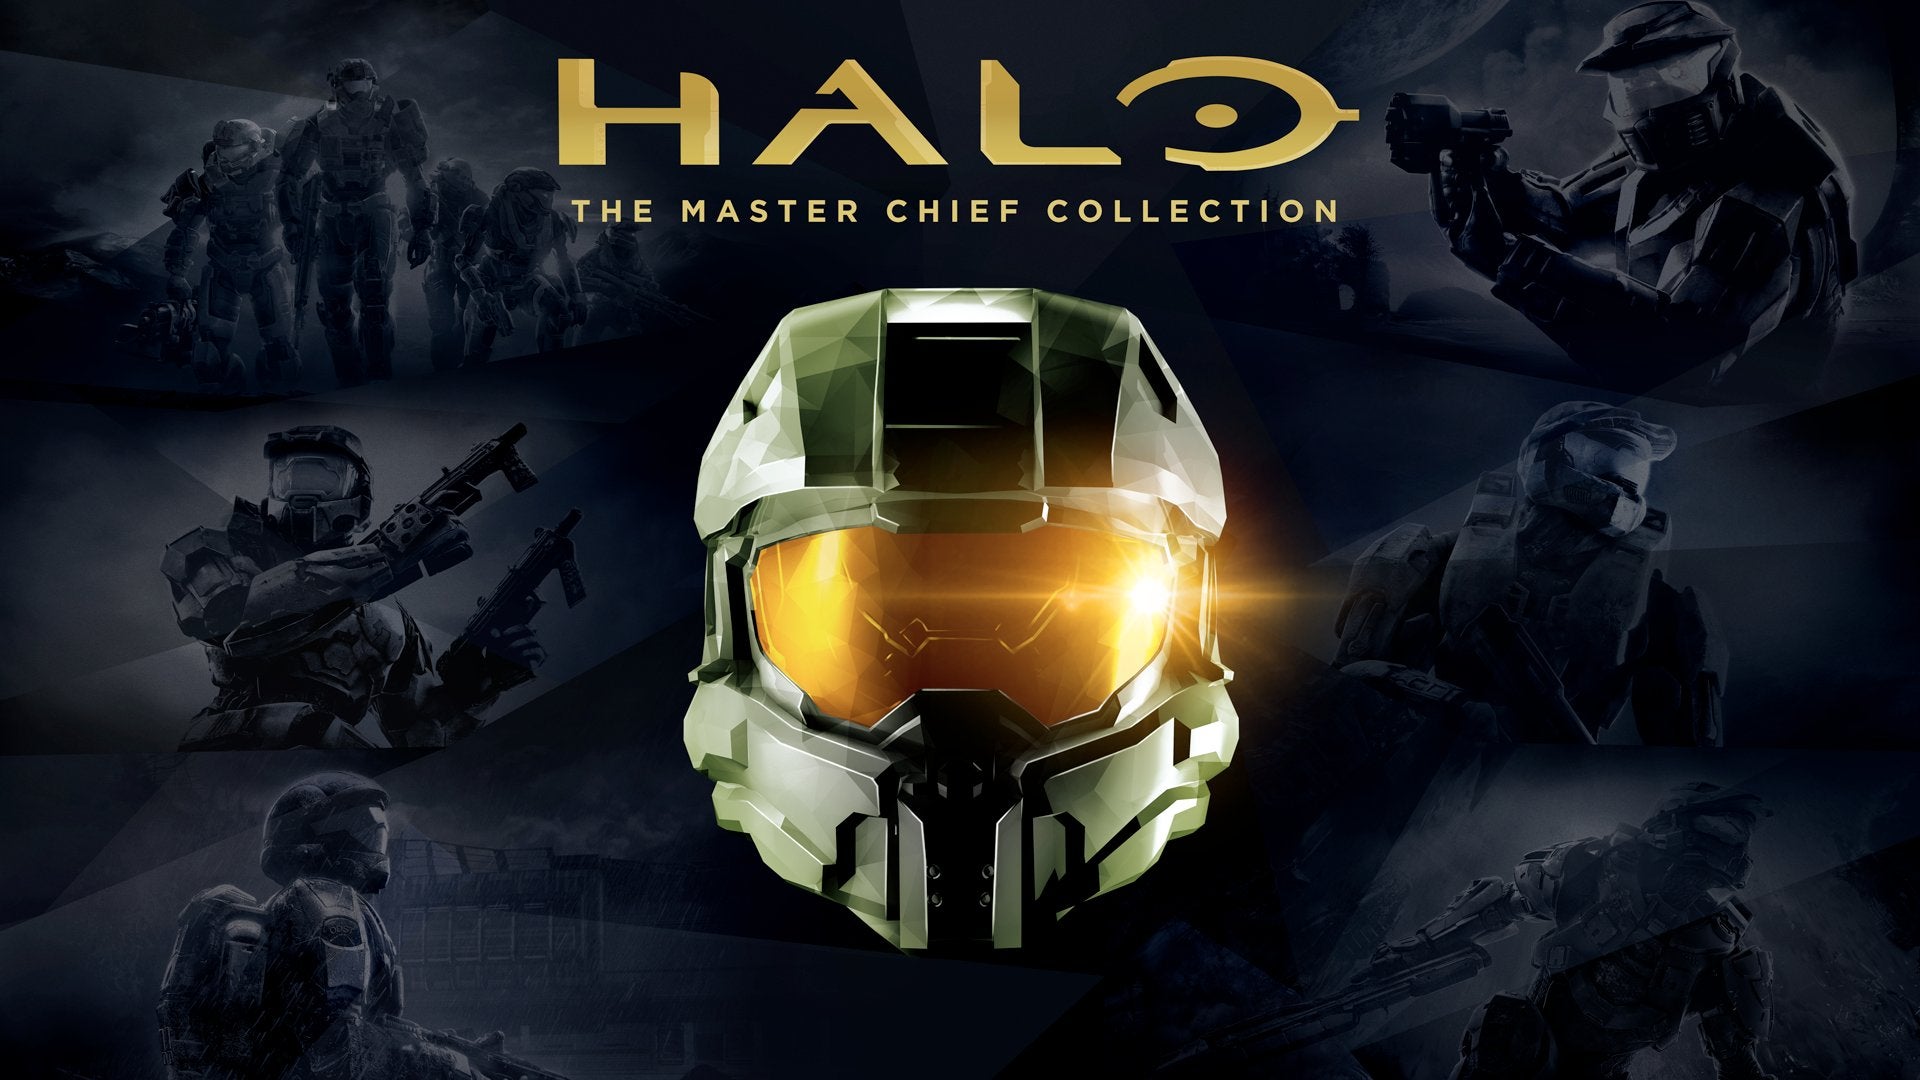 Halo: The Master Chief Collection is coming to Xbox Series X with 4K